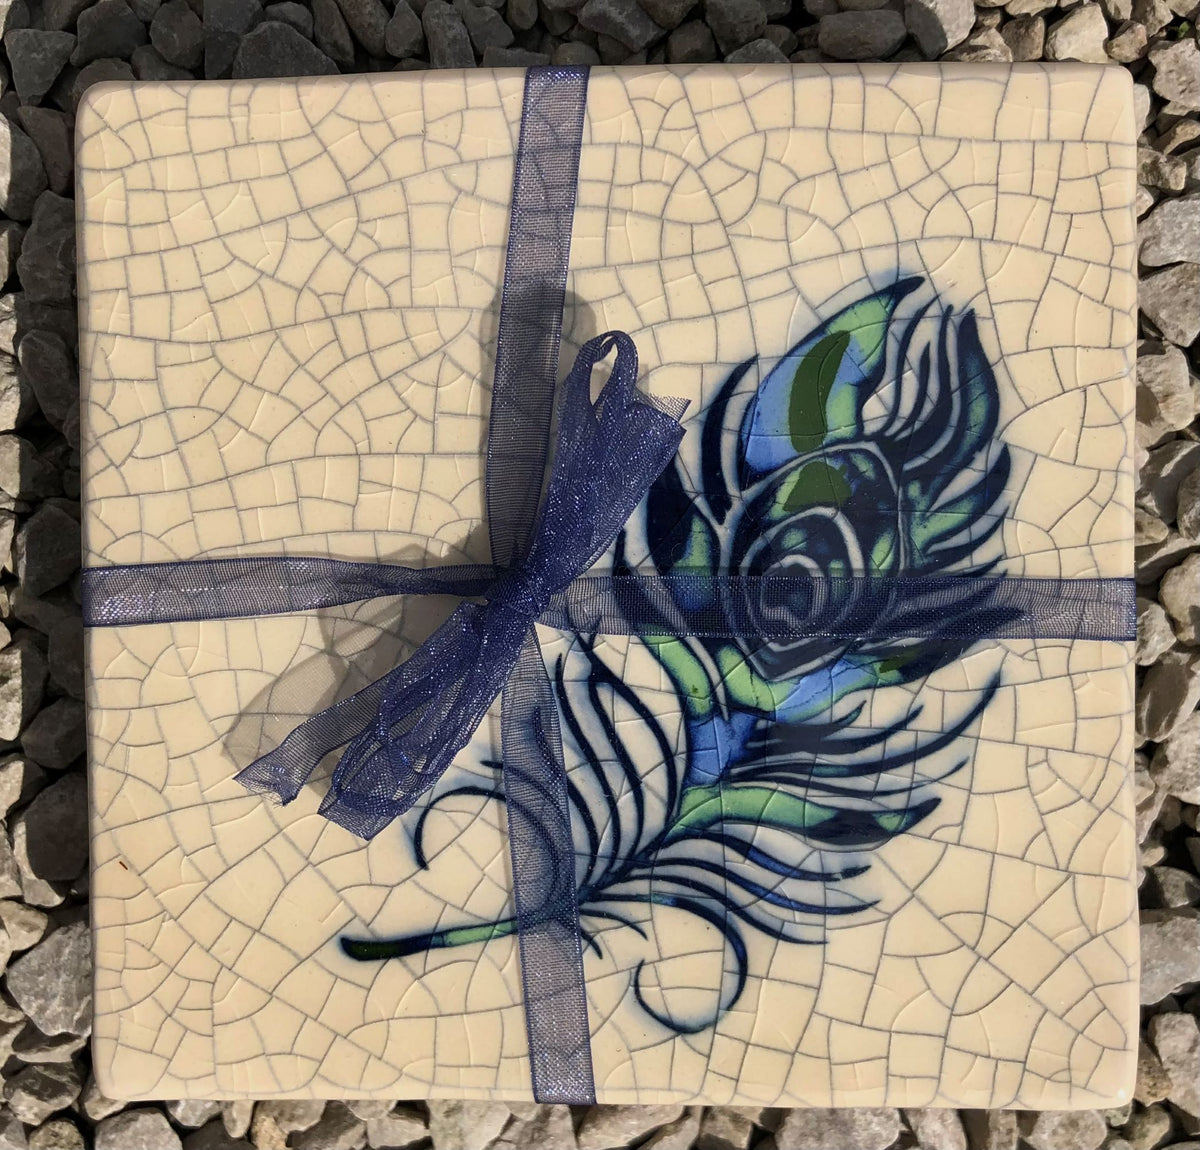 Set of two ceramic coasters with Peacock Feathers by Mel Chambers